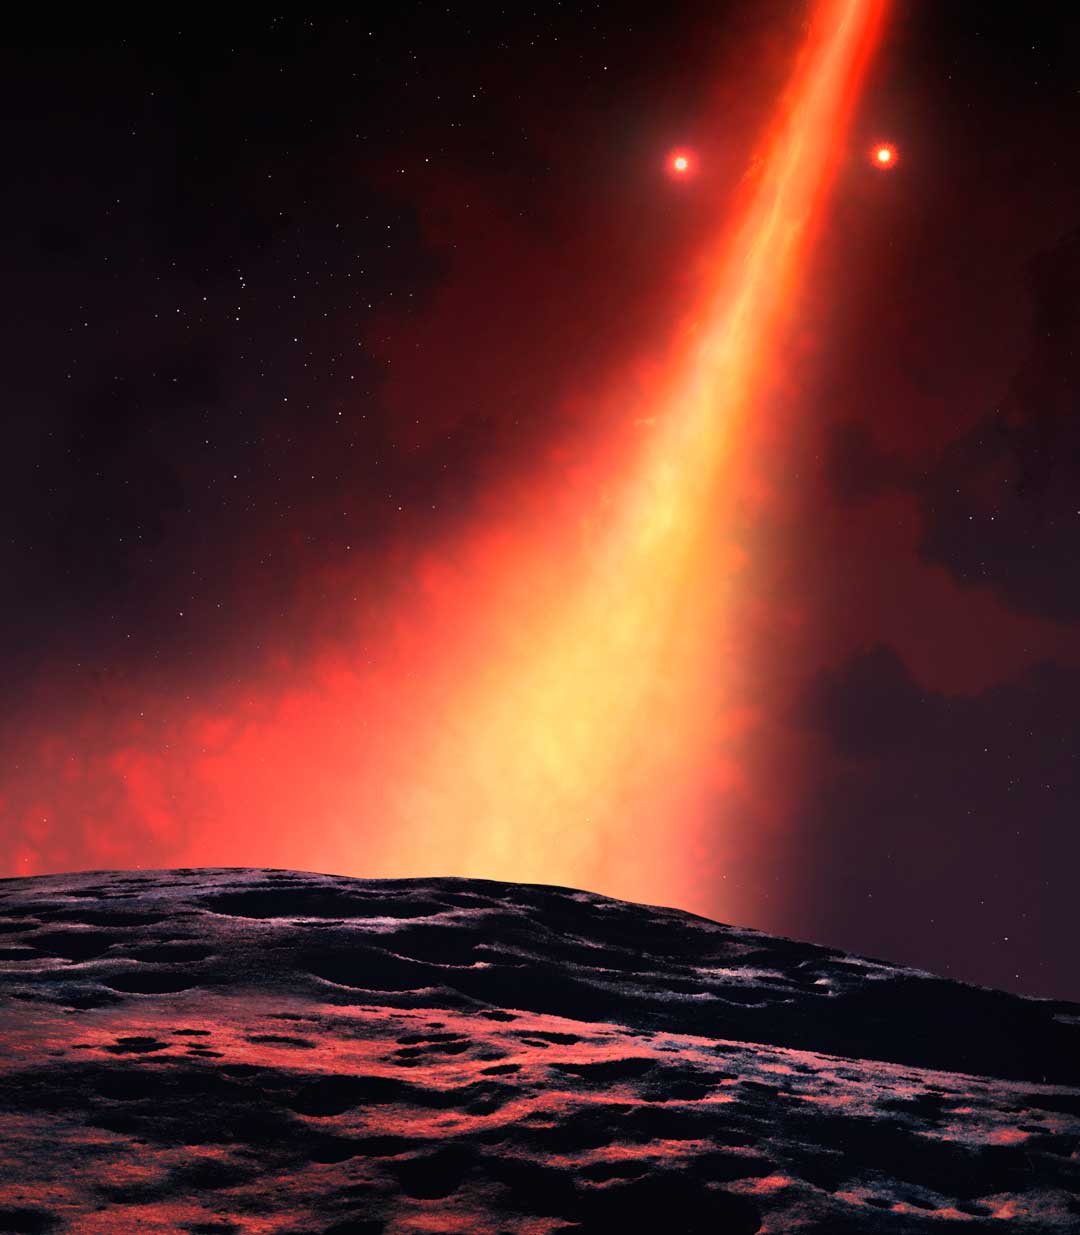 This double star system is flips planet-forming disk into pole position